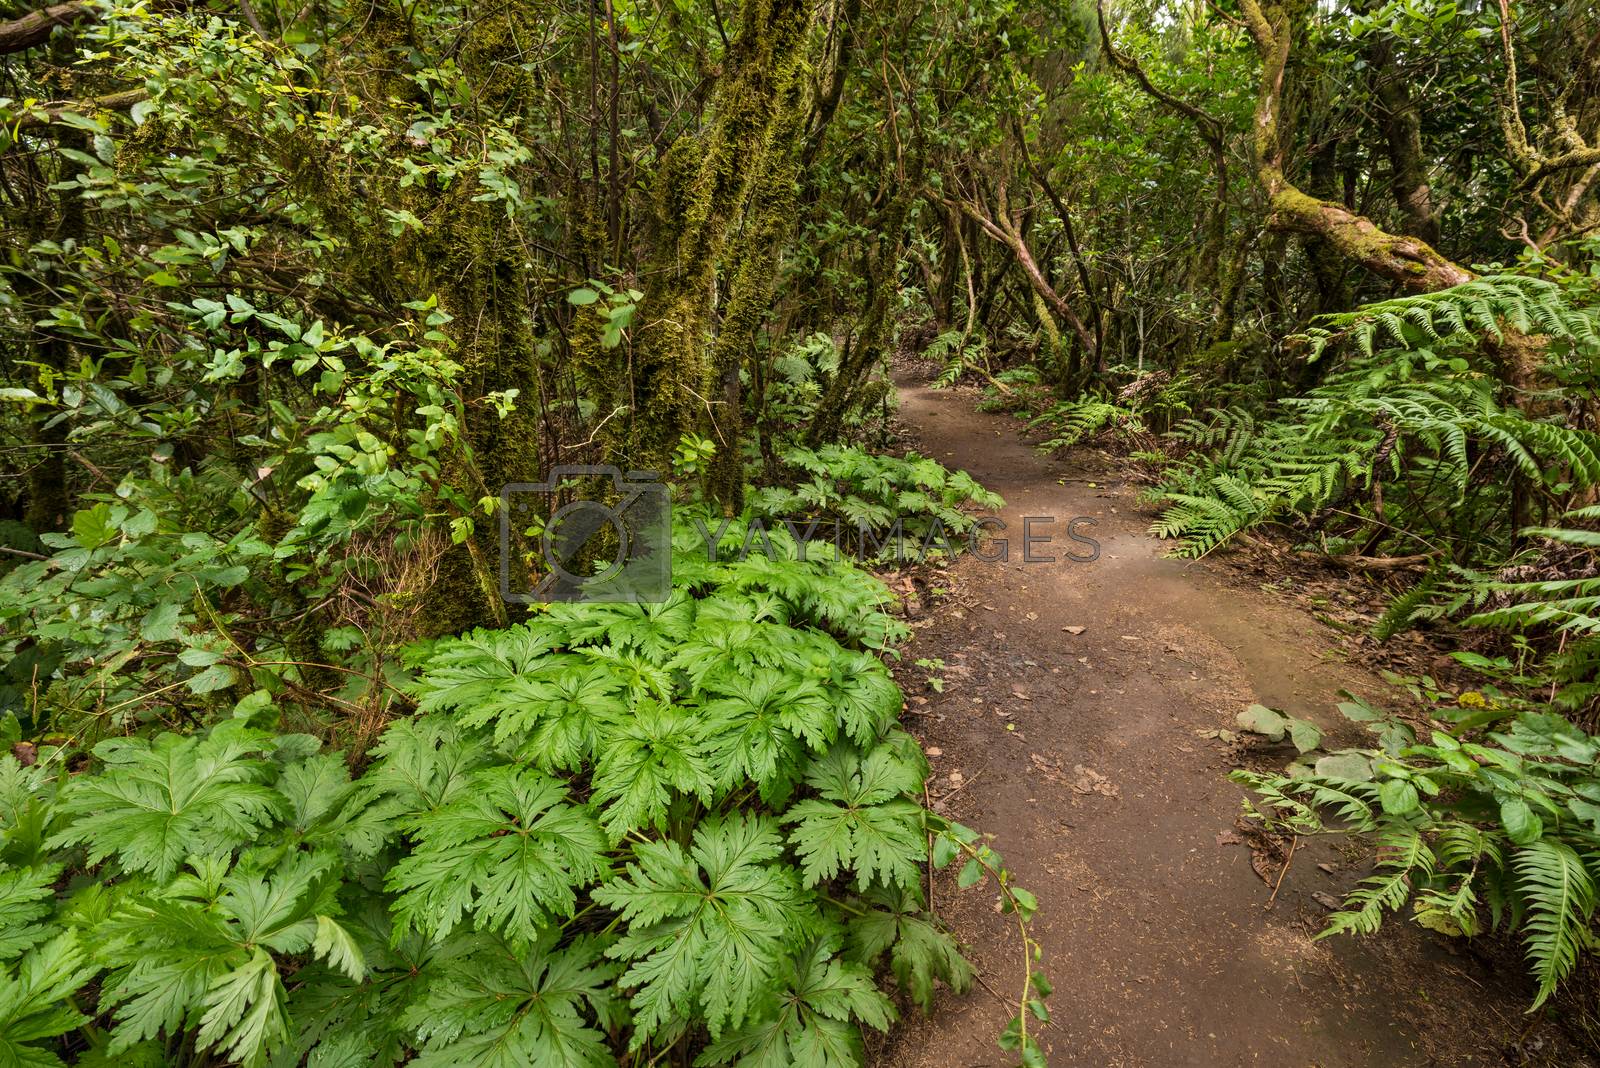 Royalty free image of Anaga rain forest in Tenerife island, Canary islands, Spain. by HERRAEZ